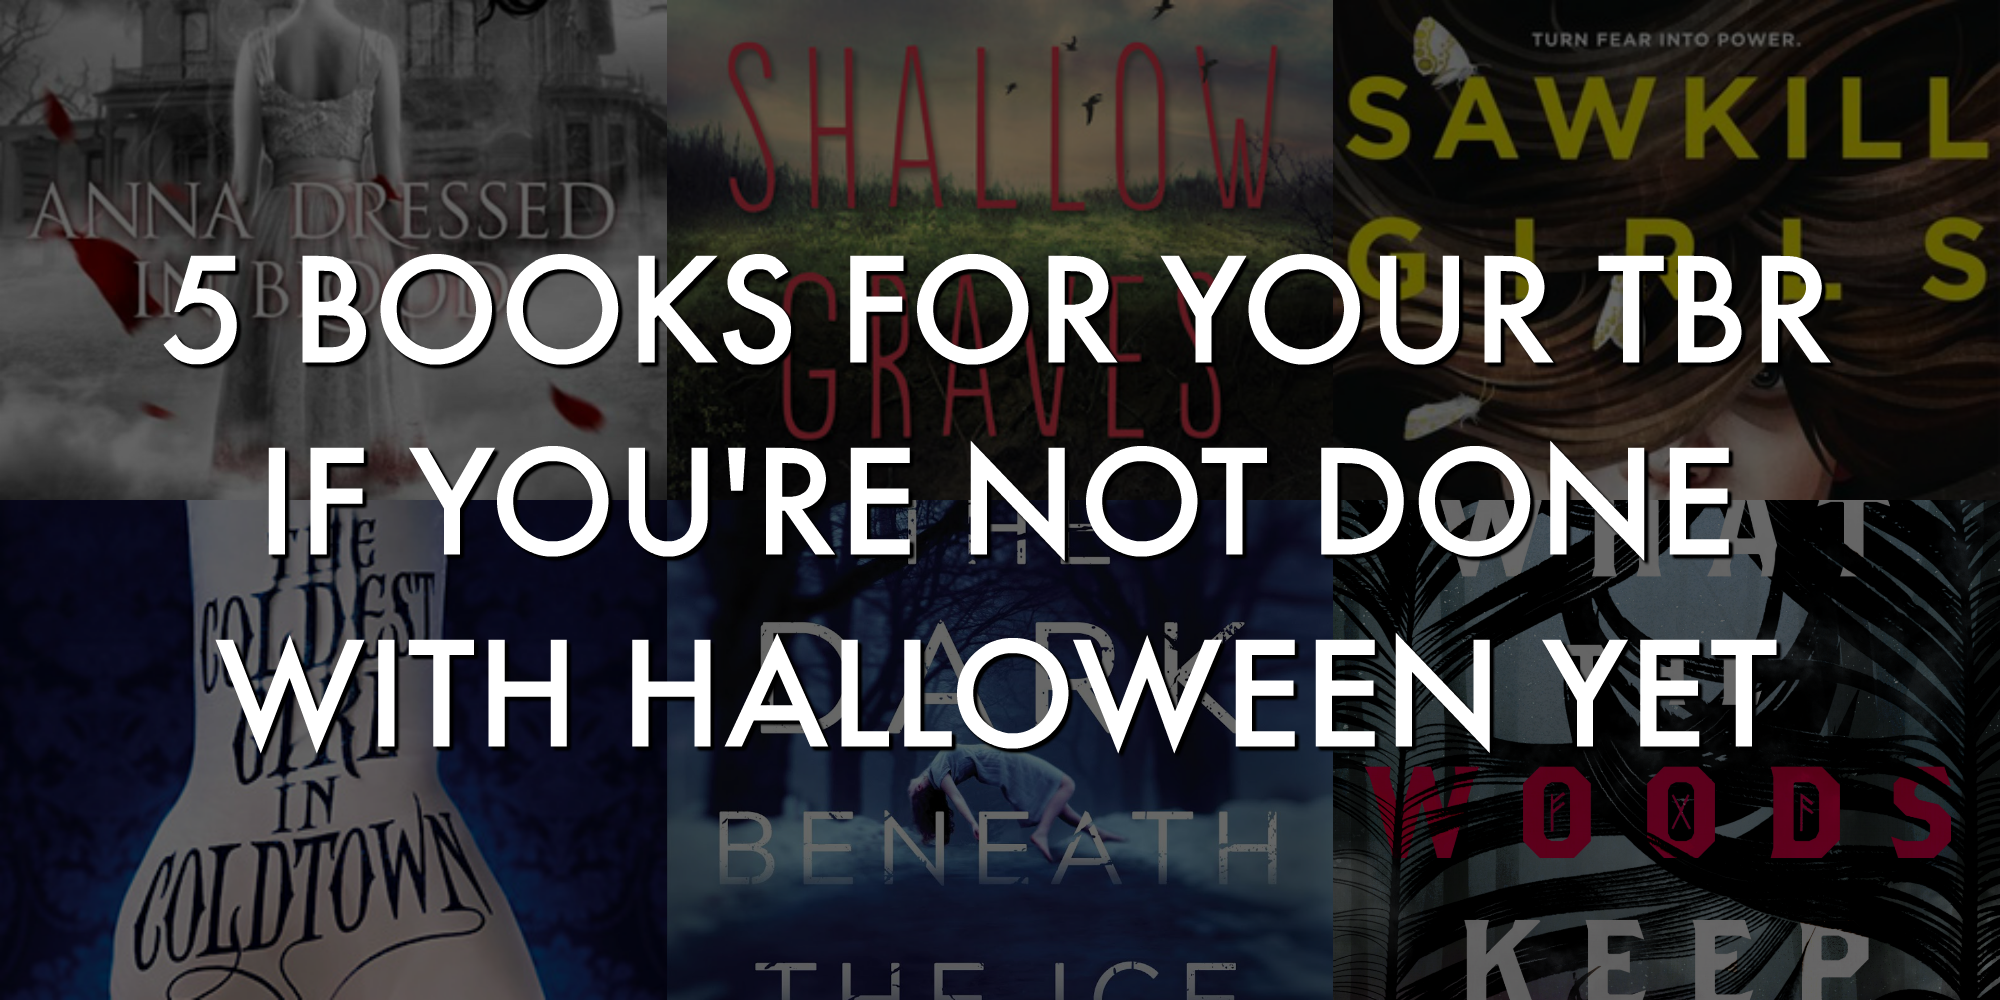 5 Books for Your TBR if You’re Not Done with Halloween Yet